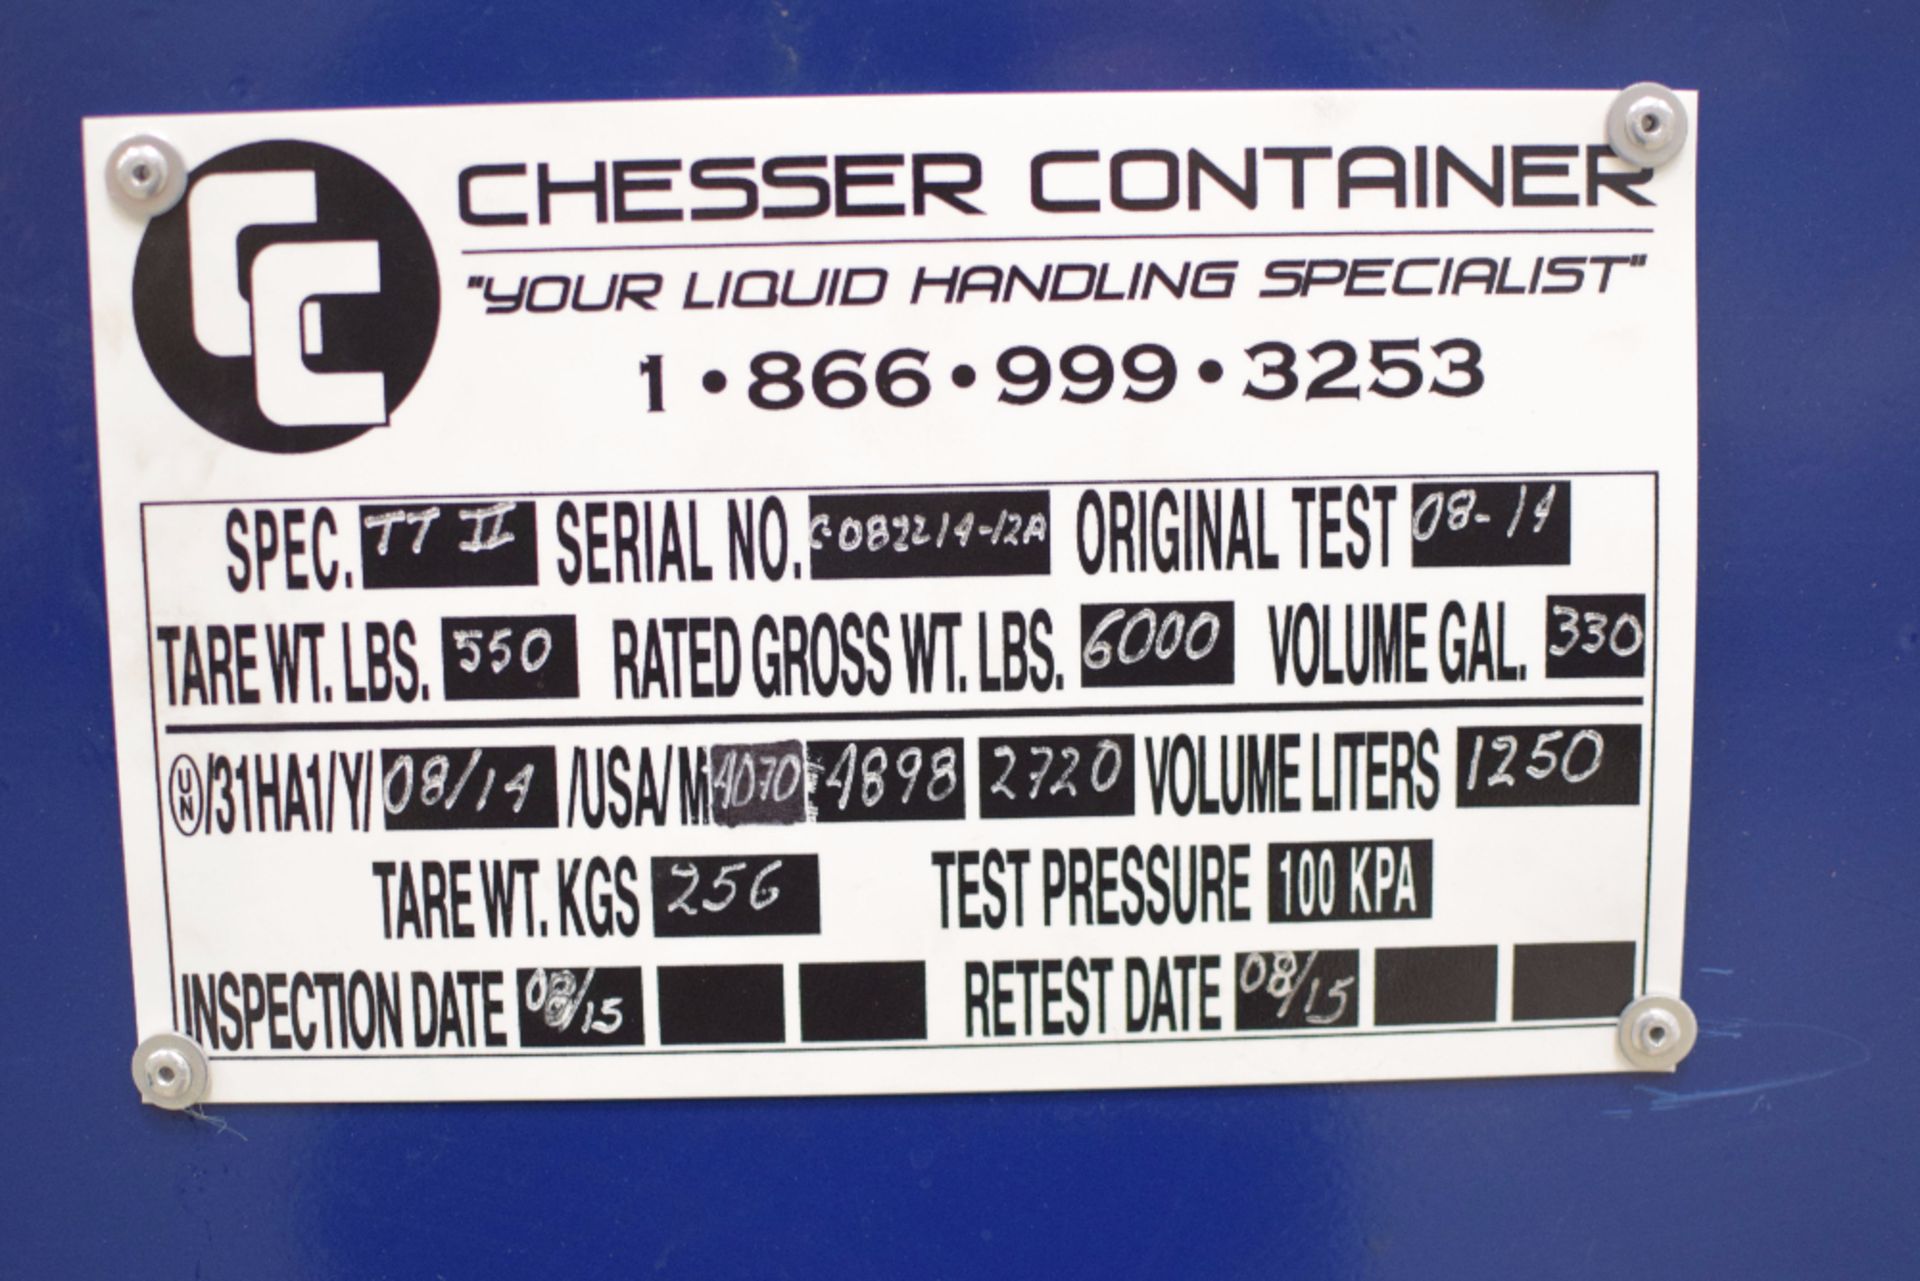 Chesser Container 330 Gallon Waste Tote - Image 2 of 2